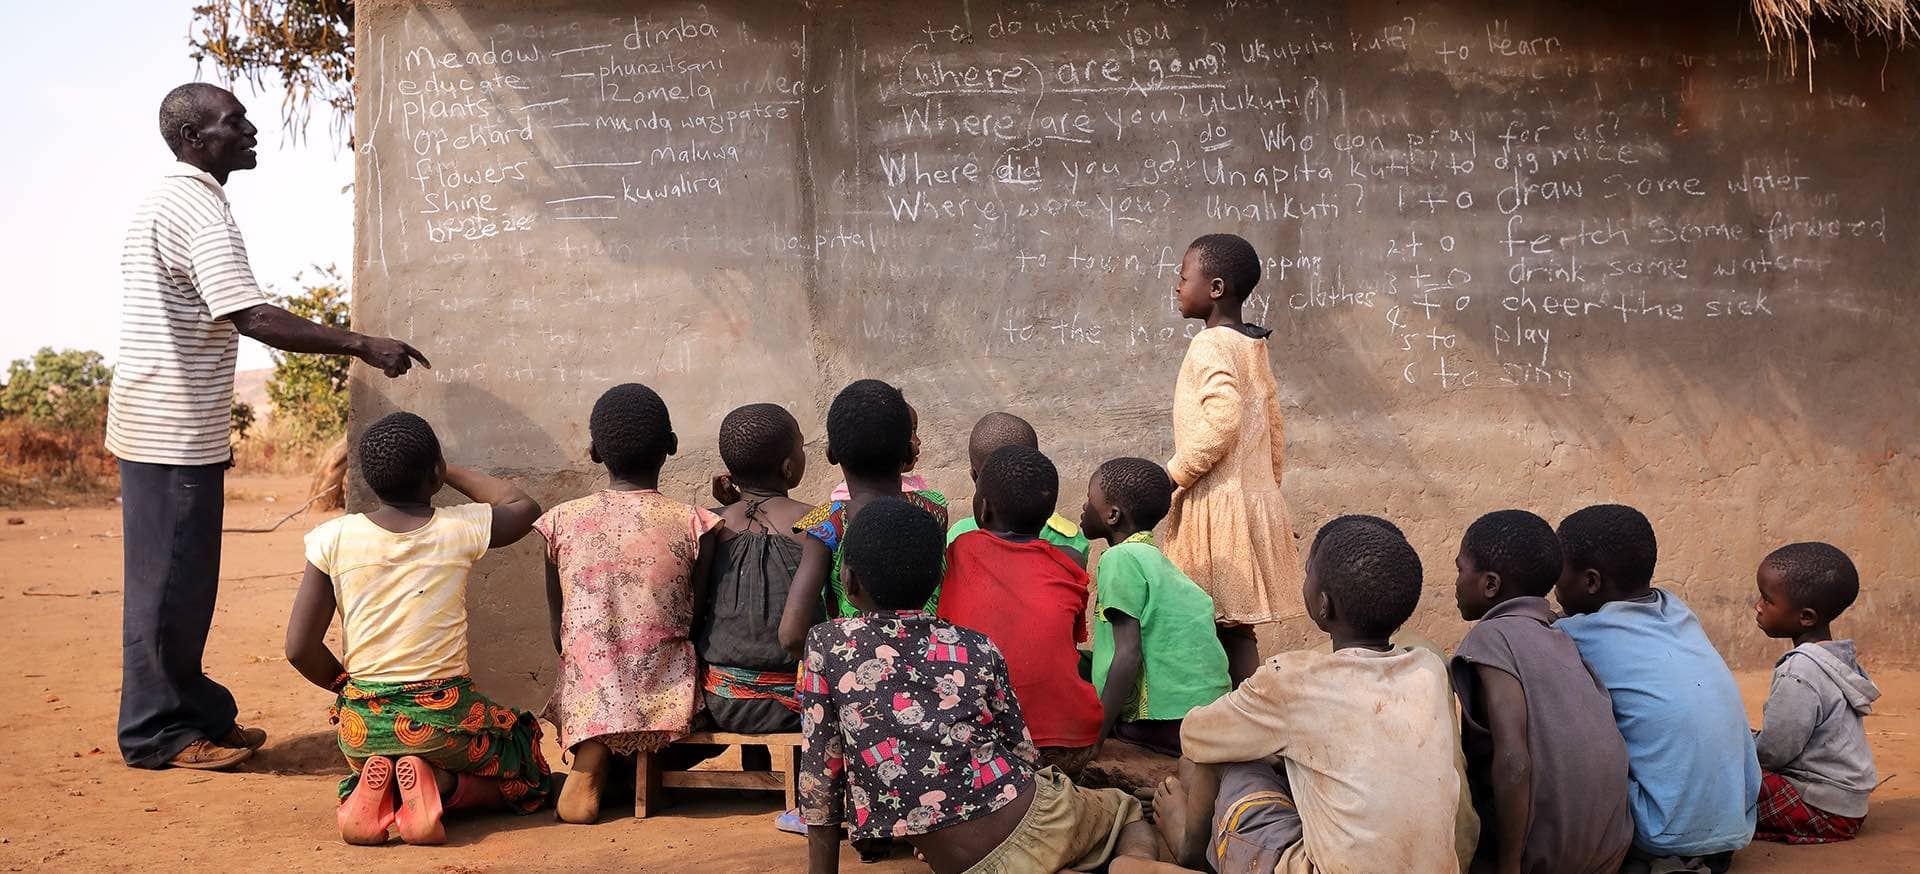 A teacher points towards a blackboard on the side of a hut while a group of children watch attentively.